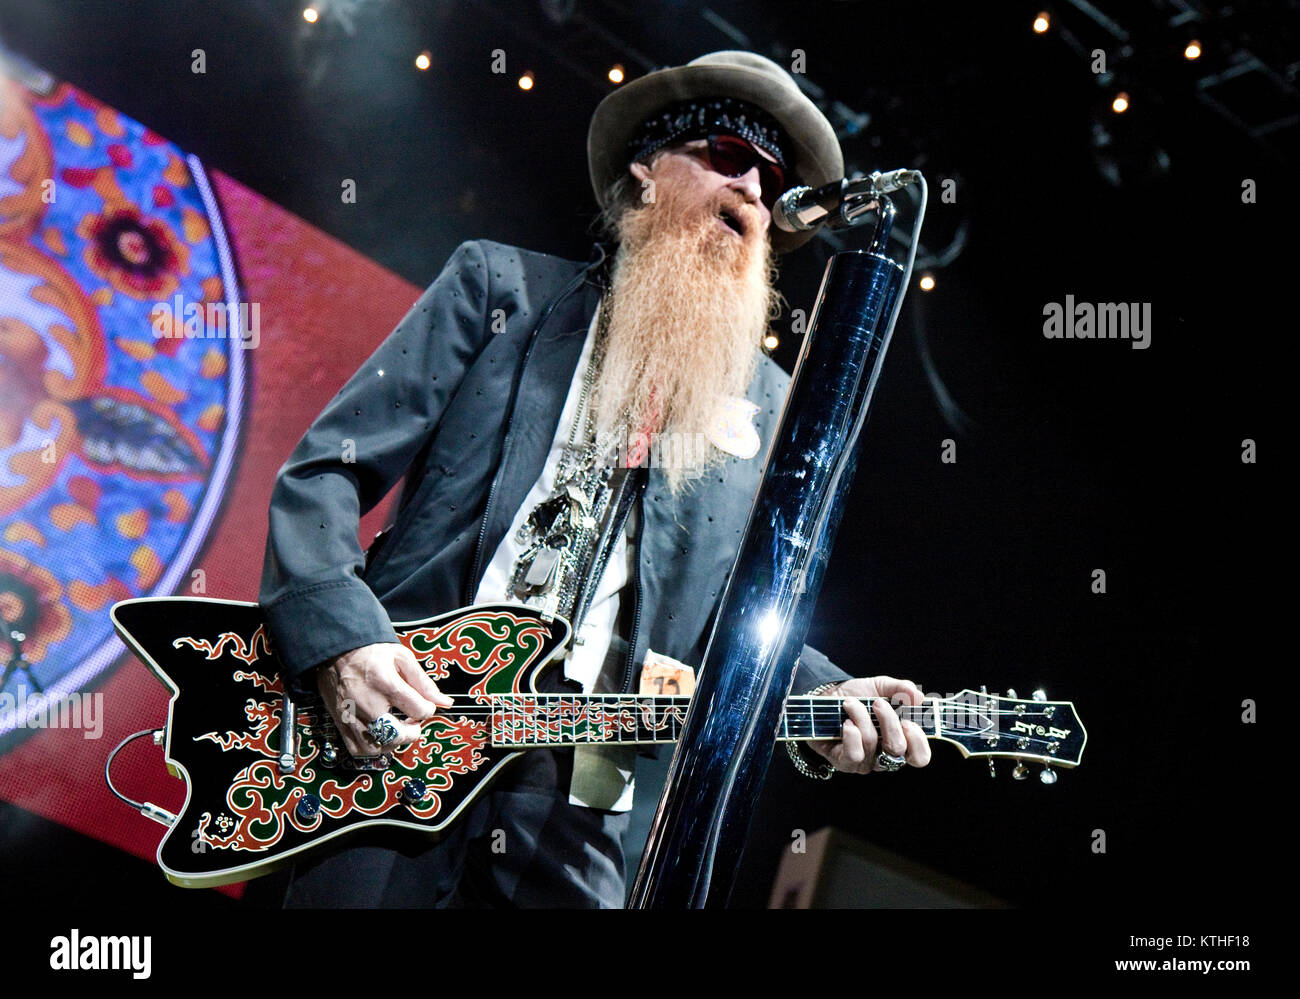 The American rock band ZZ Top performs a live concert at the Oslo Spektrum. The trio consists of Billy Gibbons, Dusty Hill and Frank Beard. Norway, 23/10 2010. Stock Photo